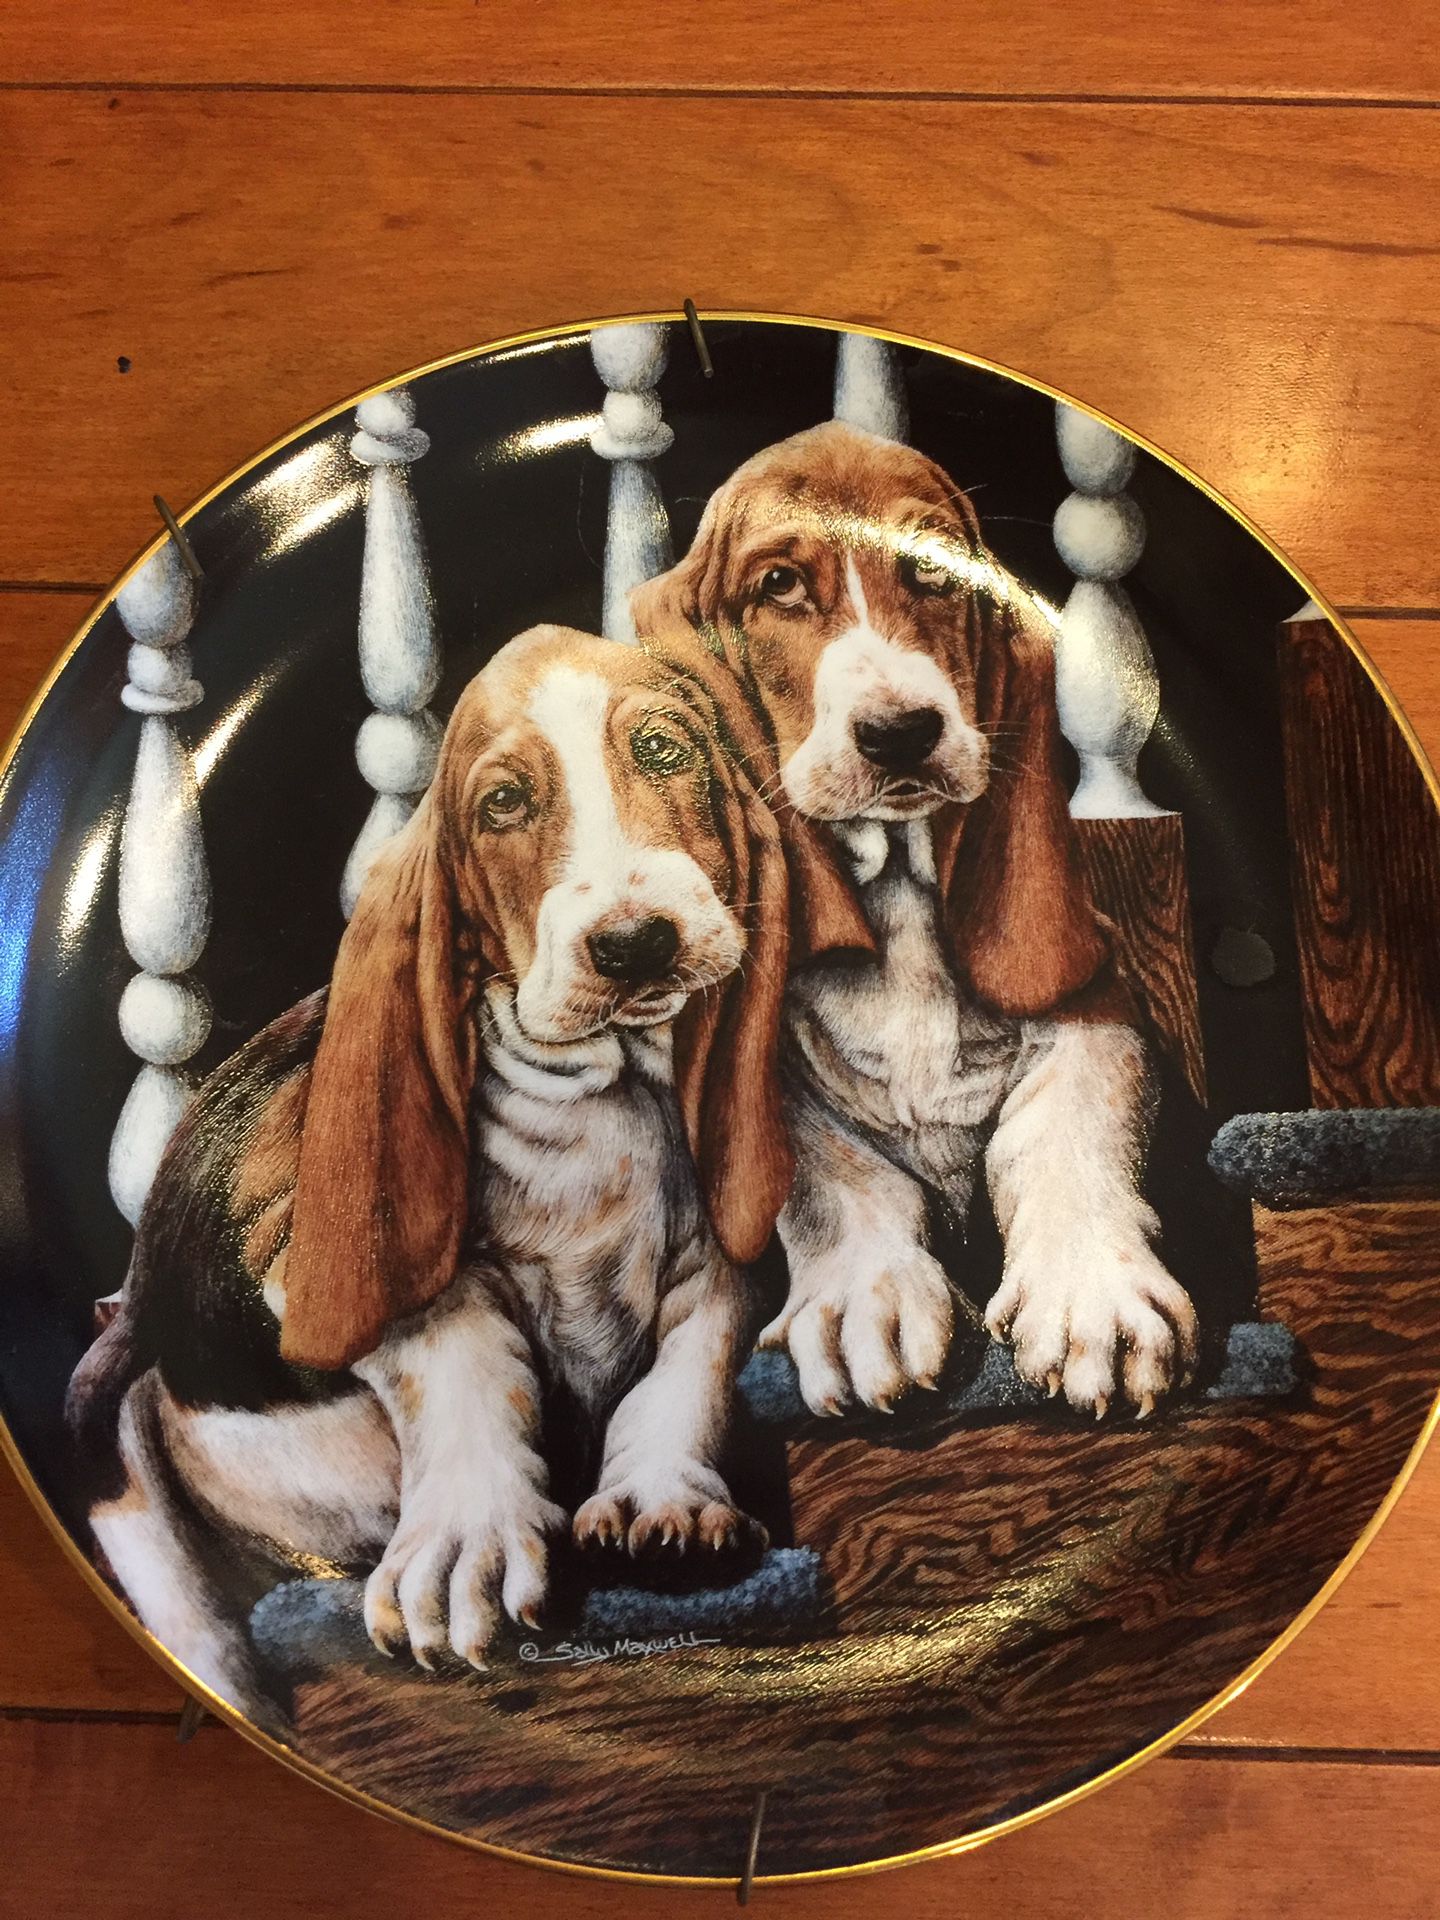 SALLY MAXWELL LOVE PUPPIES PLATE